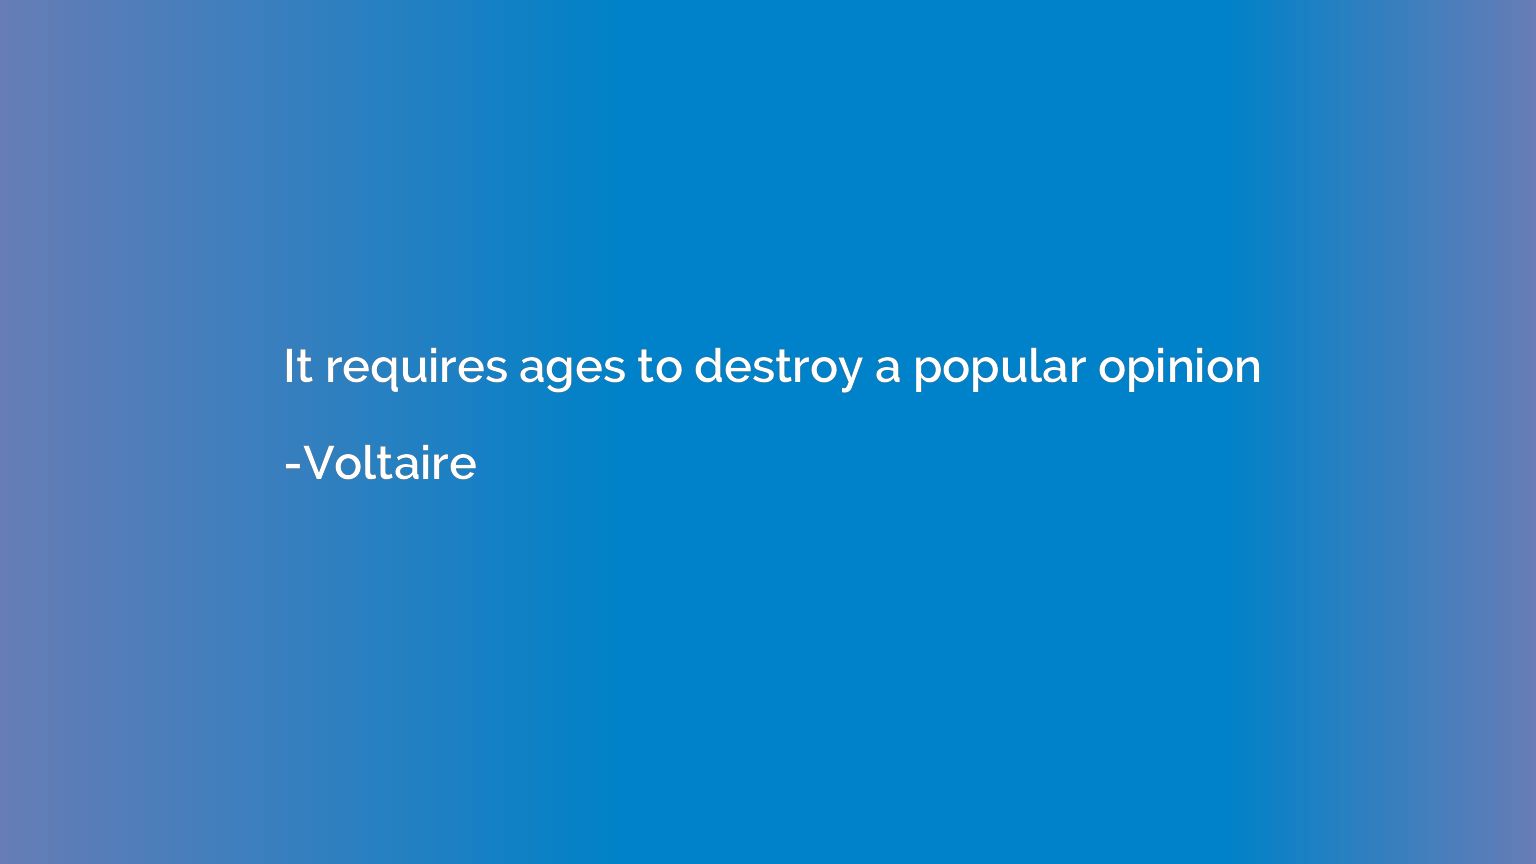 It requires ages to destroy a popular opinion